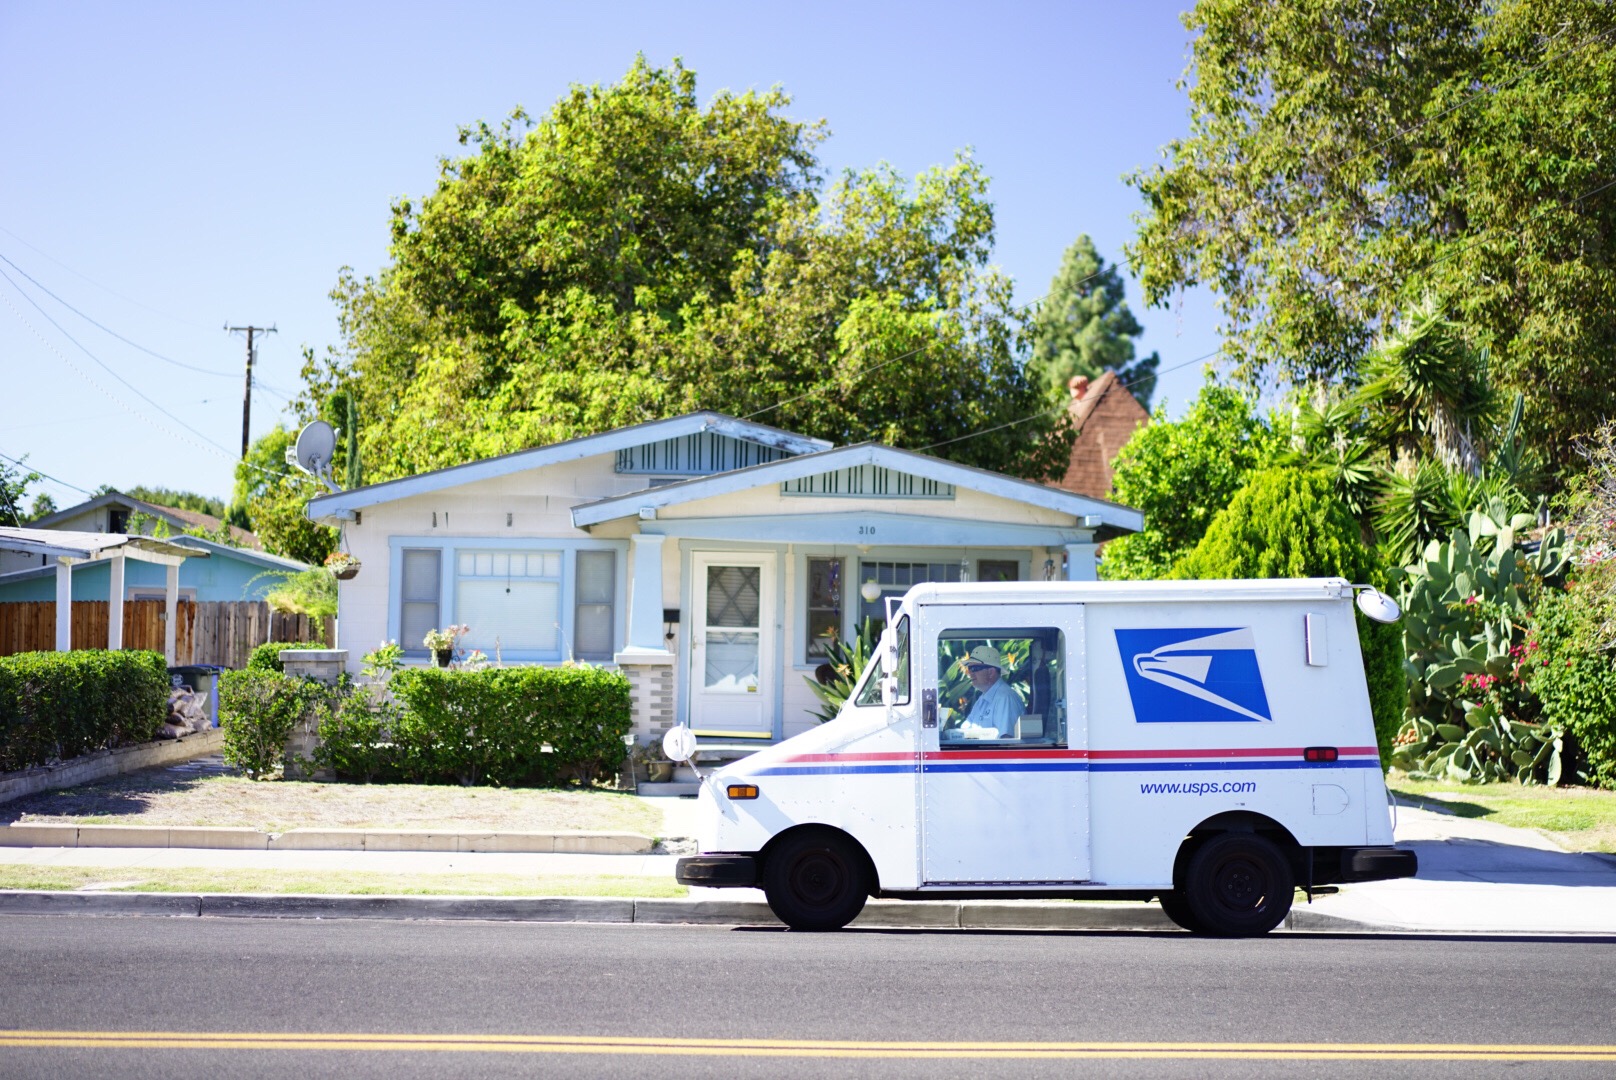 USPS, US Mail, Postal Service. Vote From Home, Vote Safe, Vote By Mail.